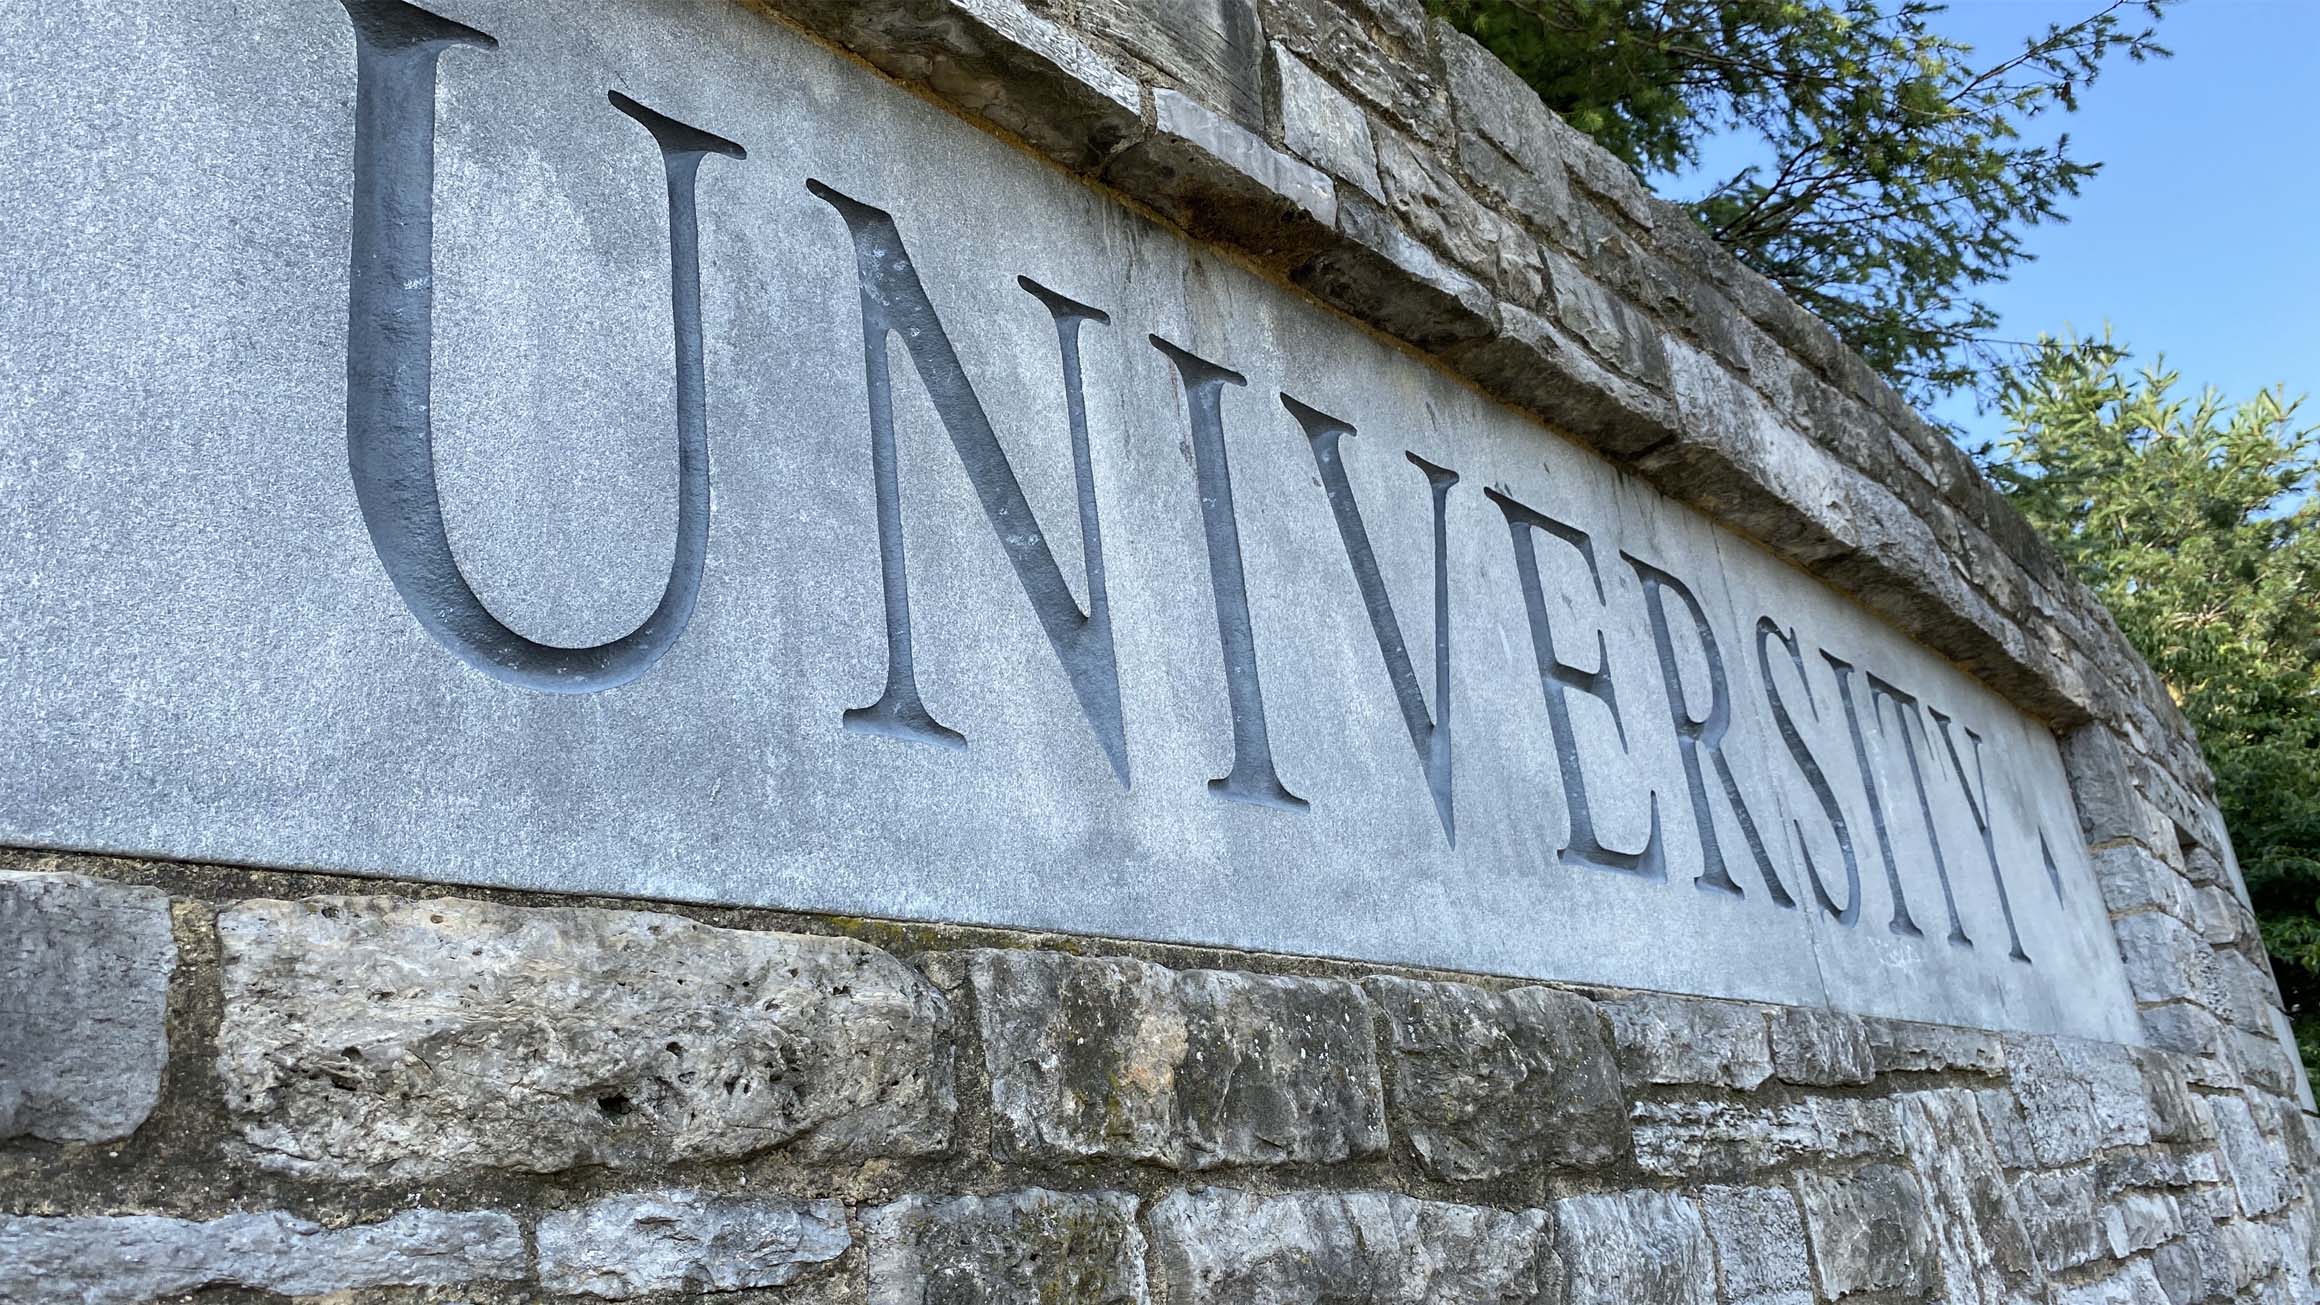 The "University" of the "Pennsylvania State University" sign is shown.